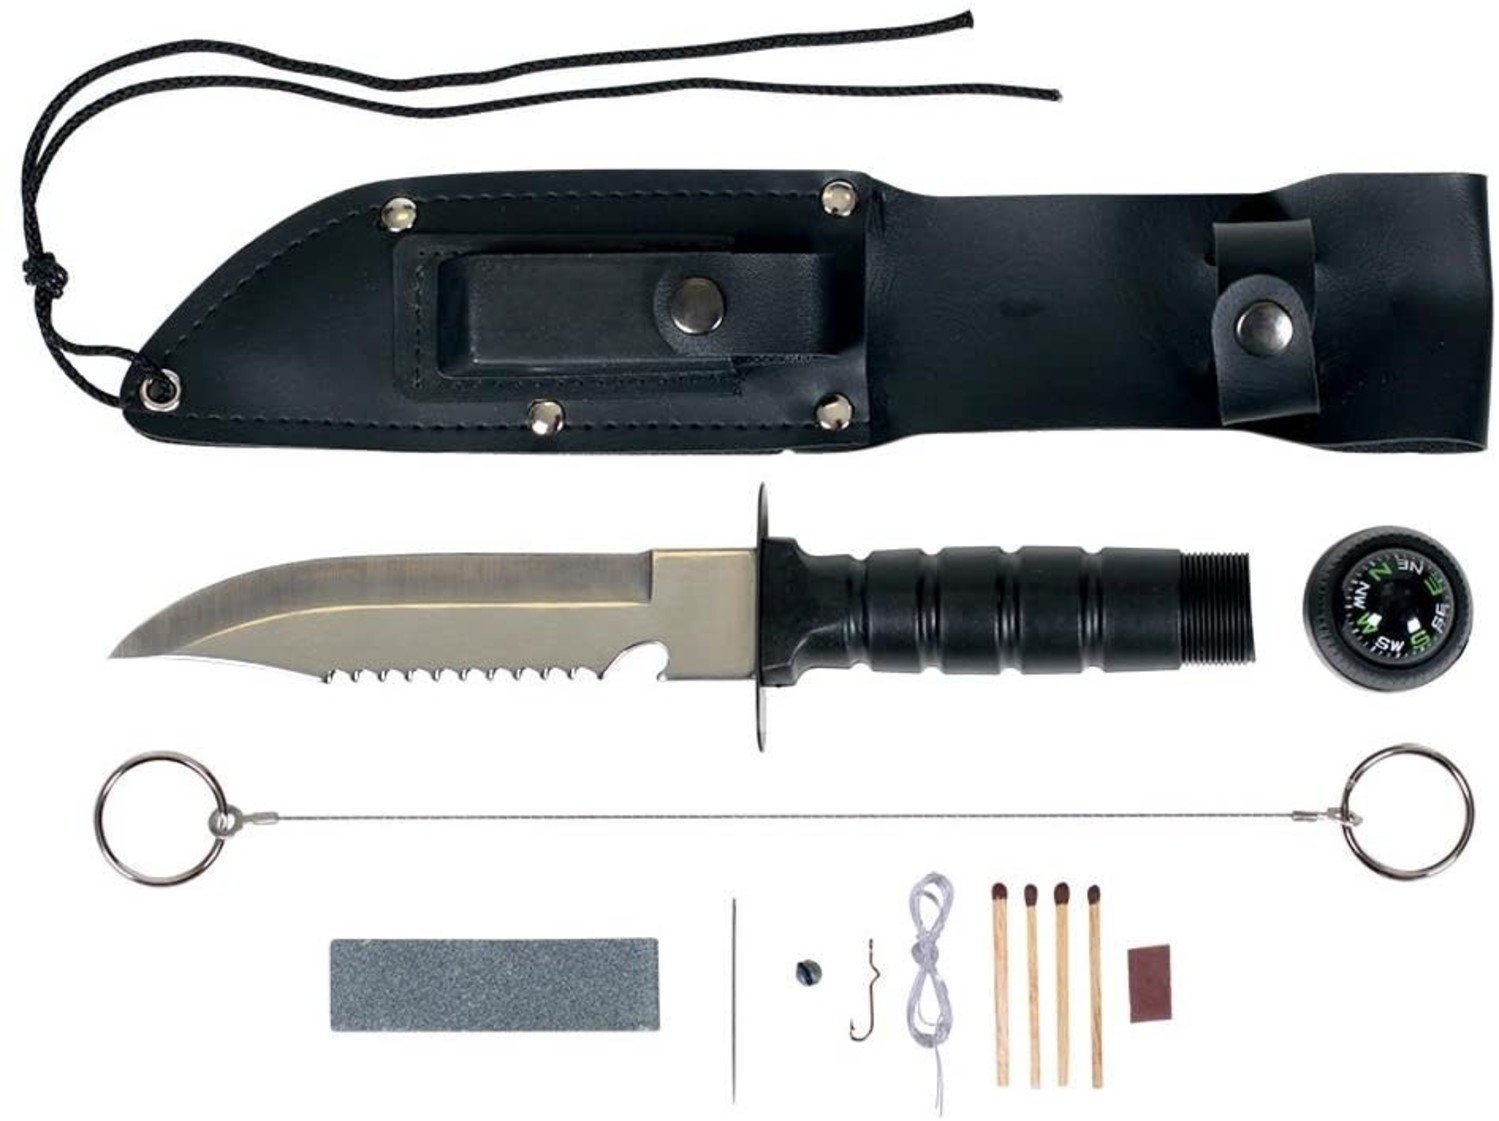 Stansport 6 Survival Knife Kit with Sheath - Outdoor Essentials